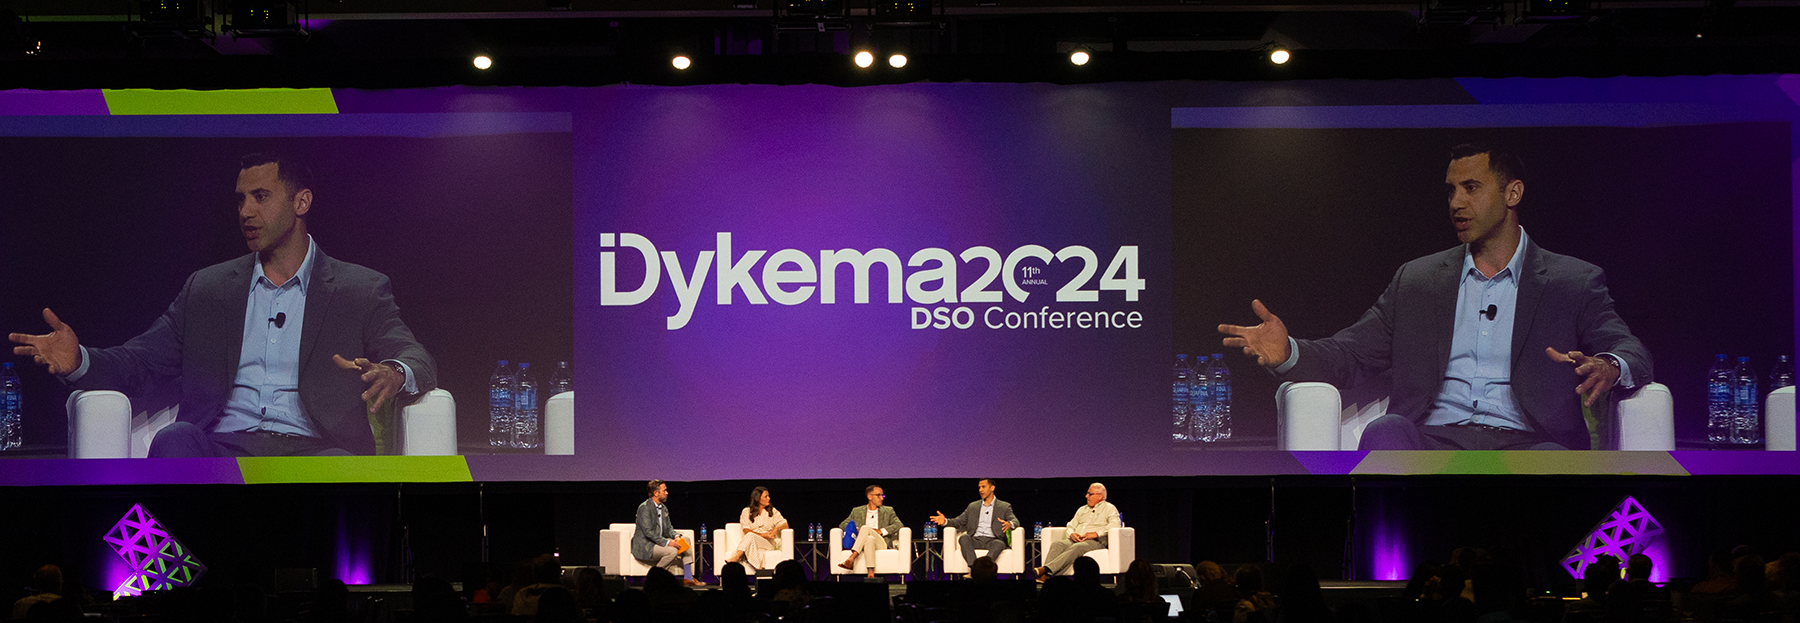 Thomas Passalacqua, director of business development at The Smilest Management speaks at the 2024 Dykema DSO conference | Image Credit: © Courtesy Dykema DSO Industry Group